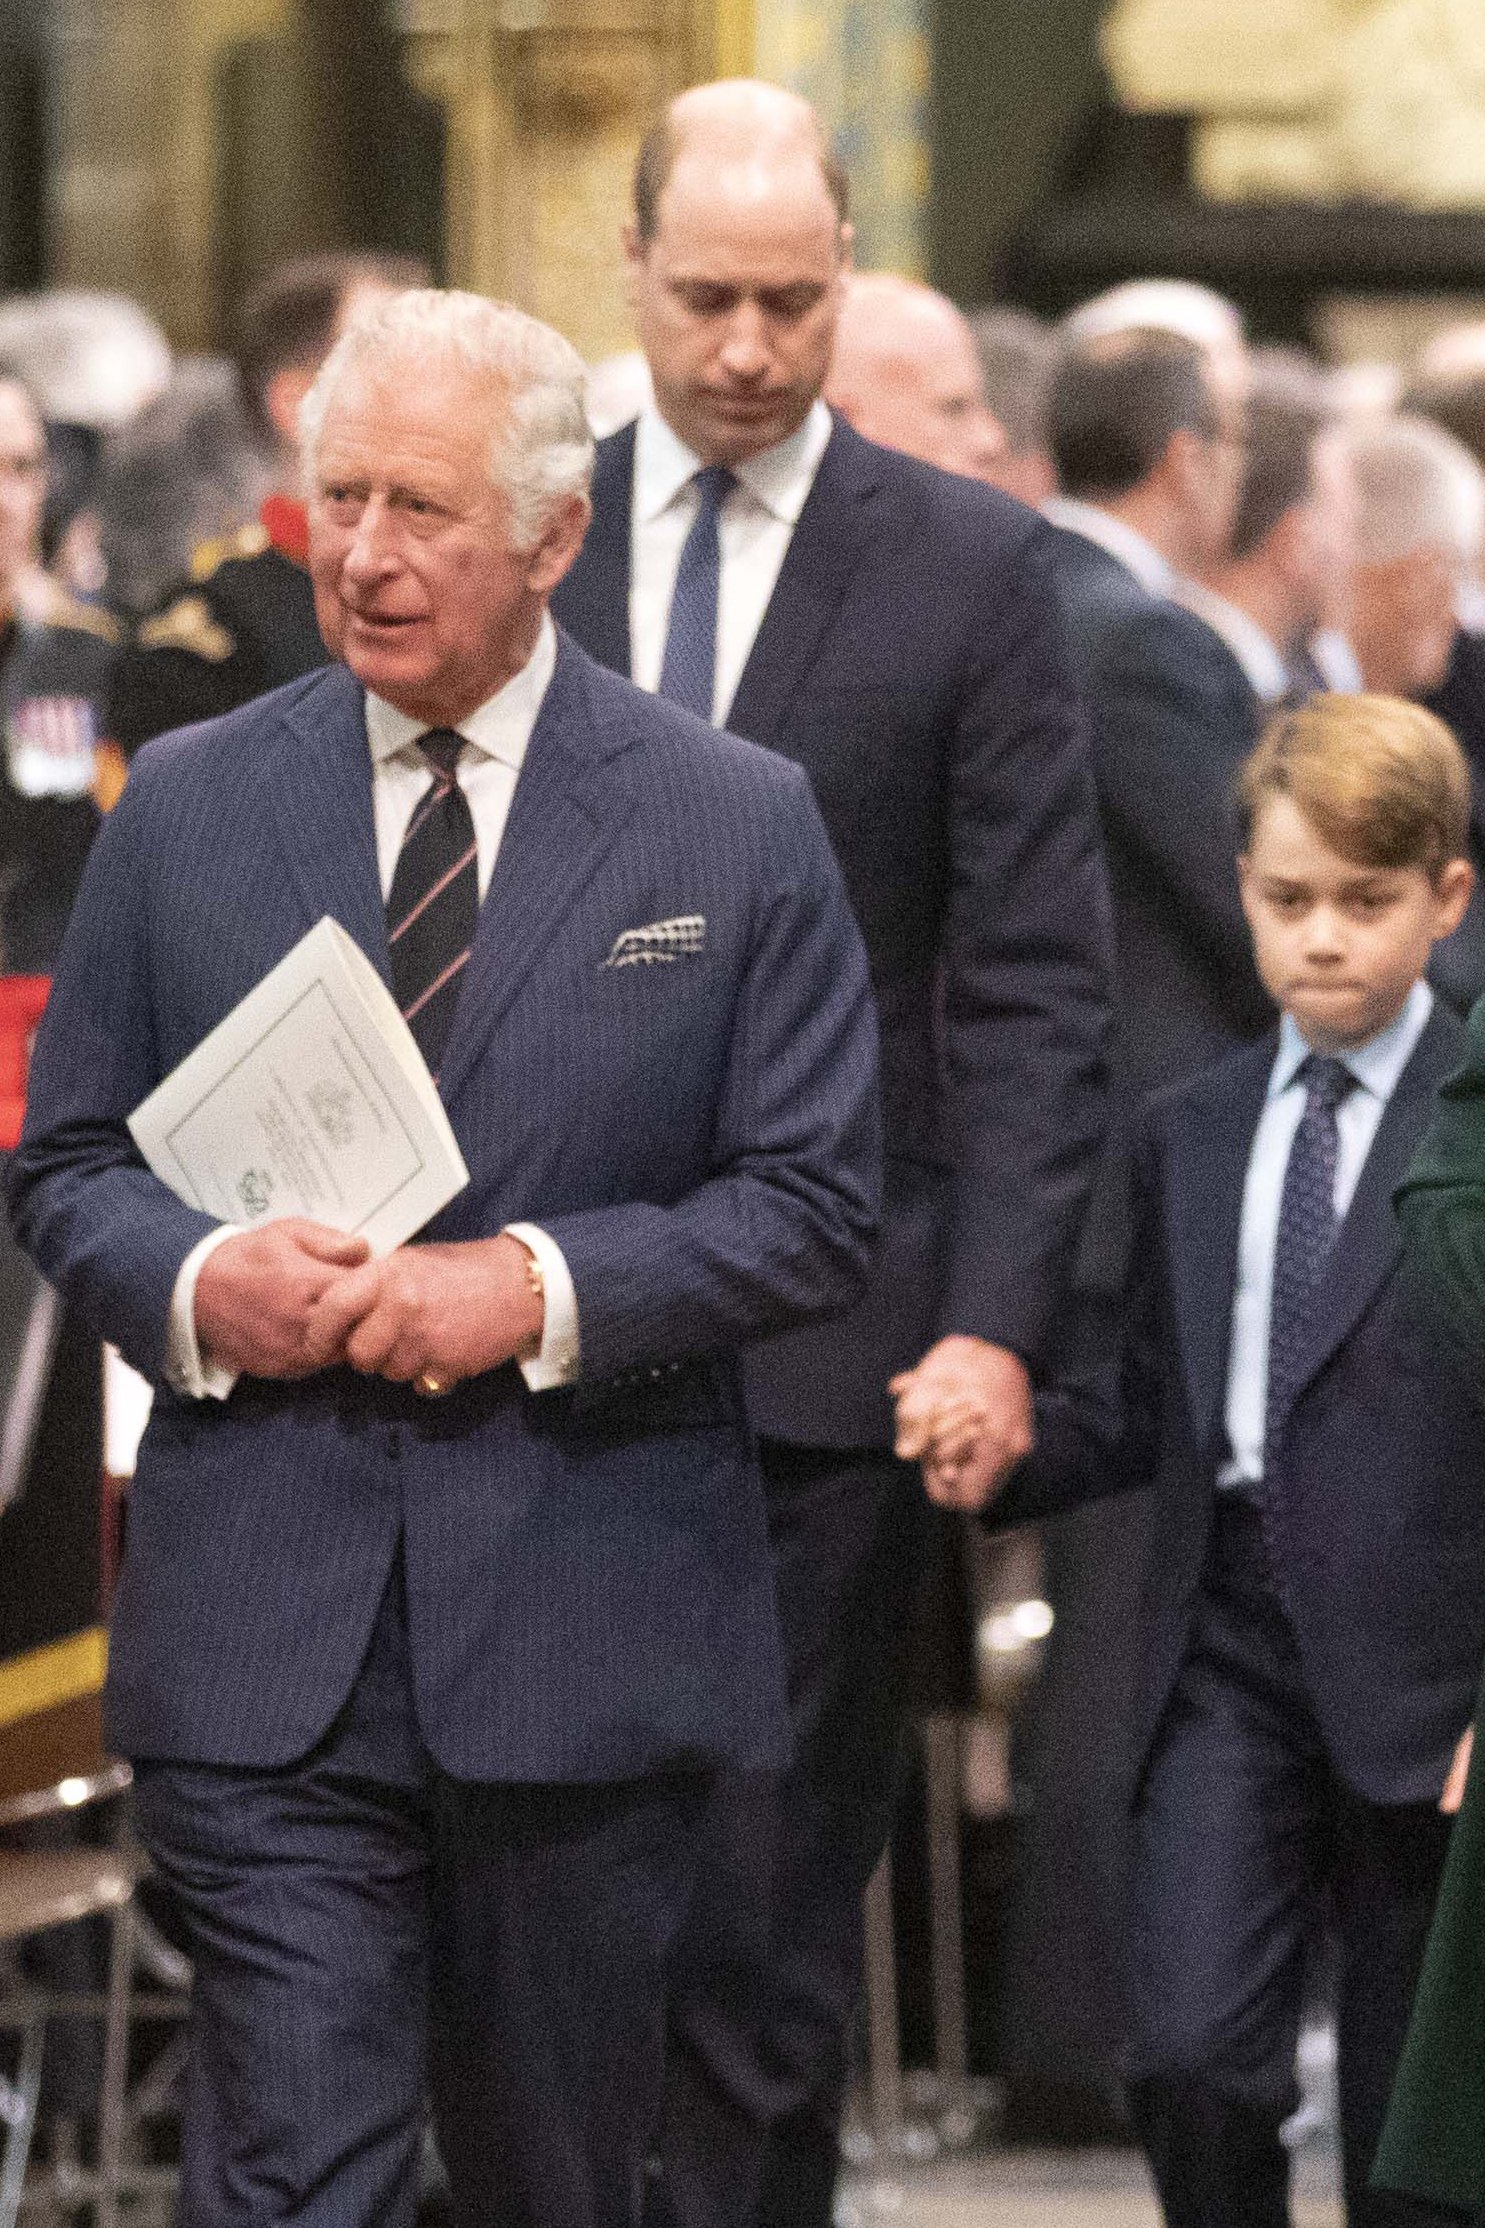 Prince Charles, Prince William, and Prince George attend a Service of Thanksgiving for Prince Philip at Westminster Abbey in central London on March 29, 2022. | Source: Getty Images